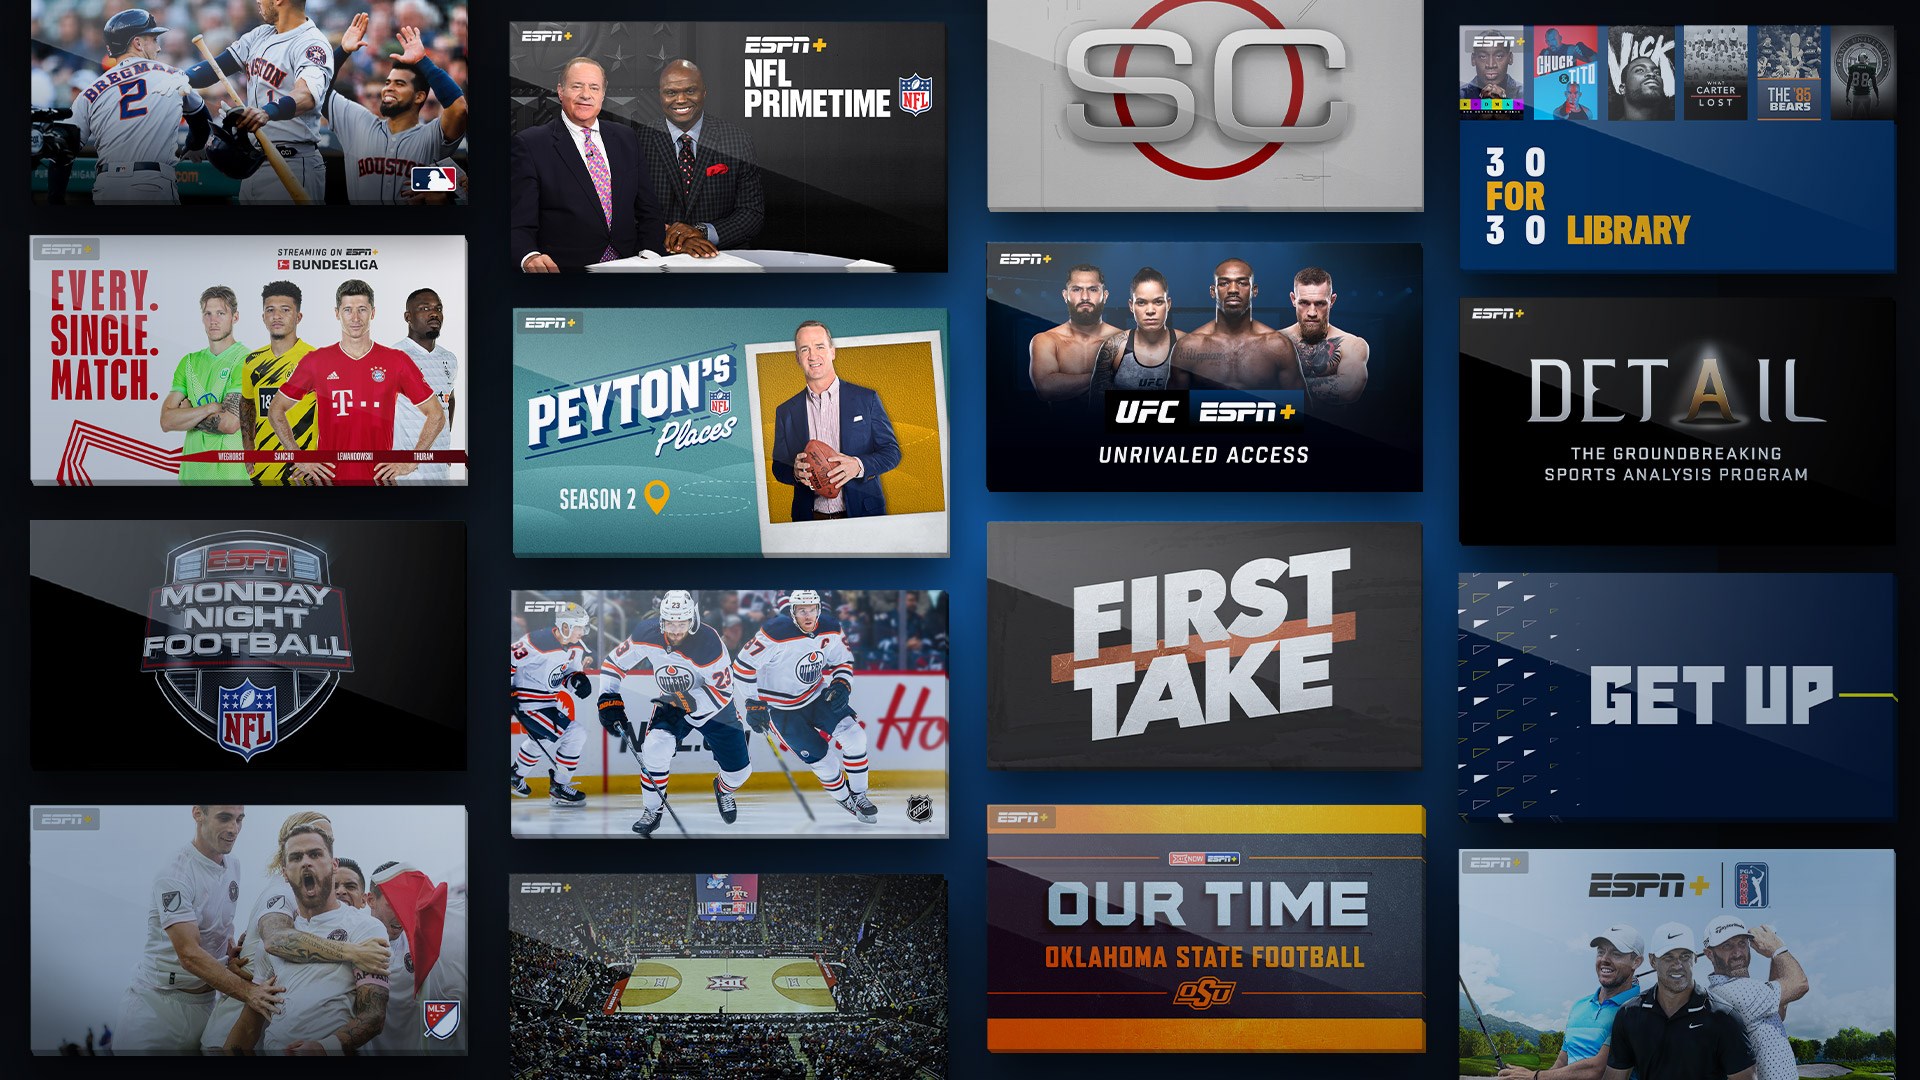 Microsoft Brings New ESPN And NFL Experiences To Xbox One